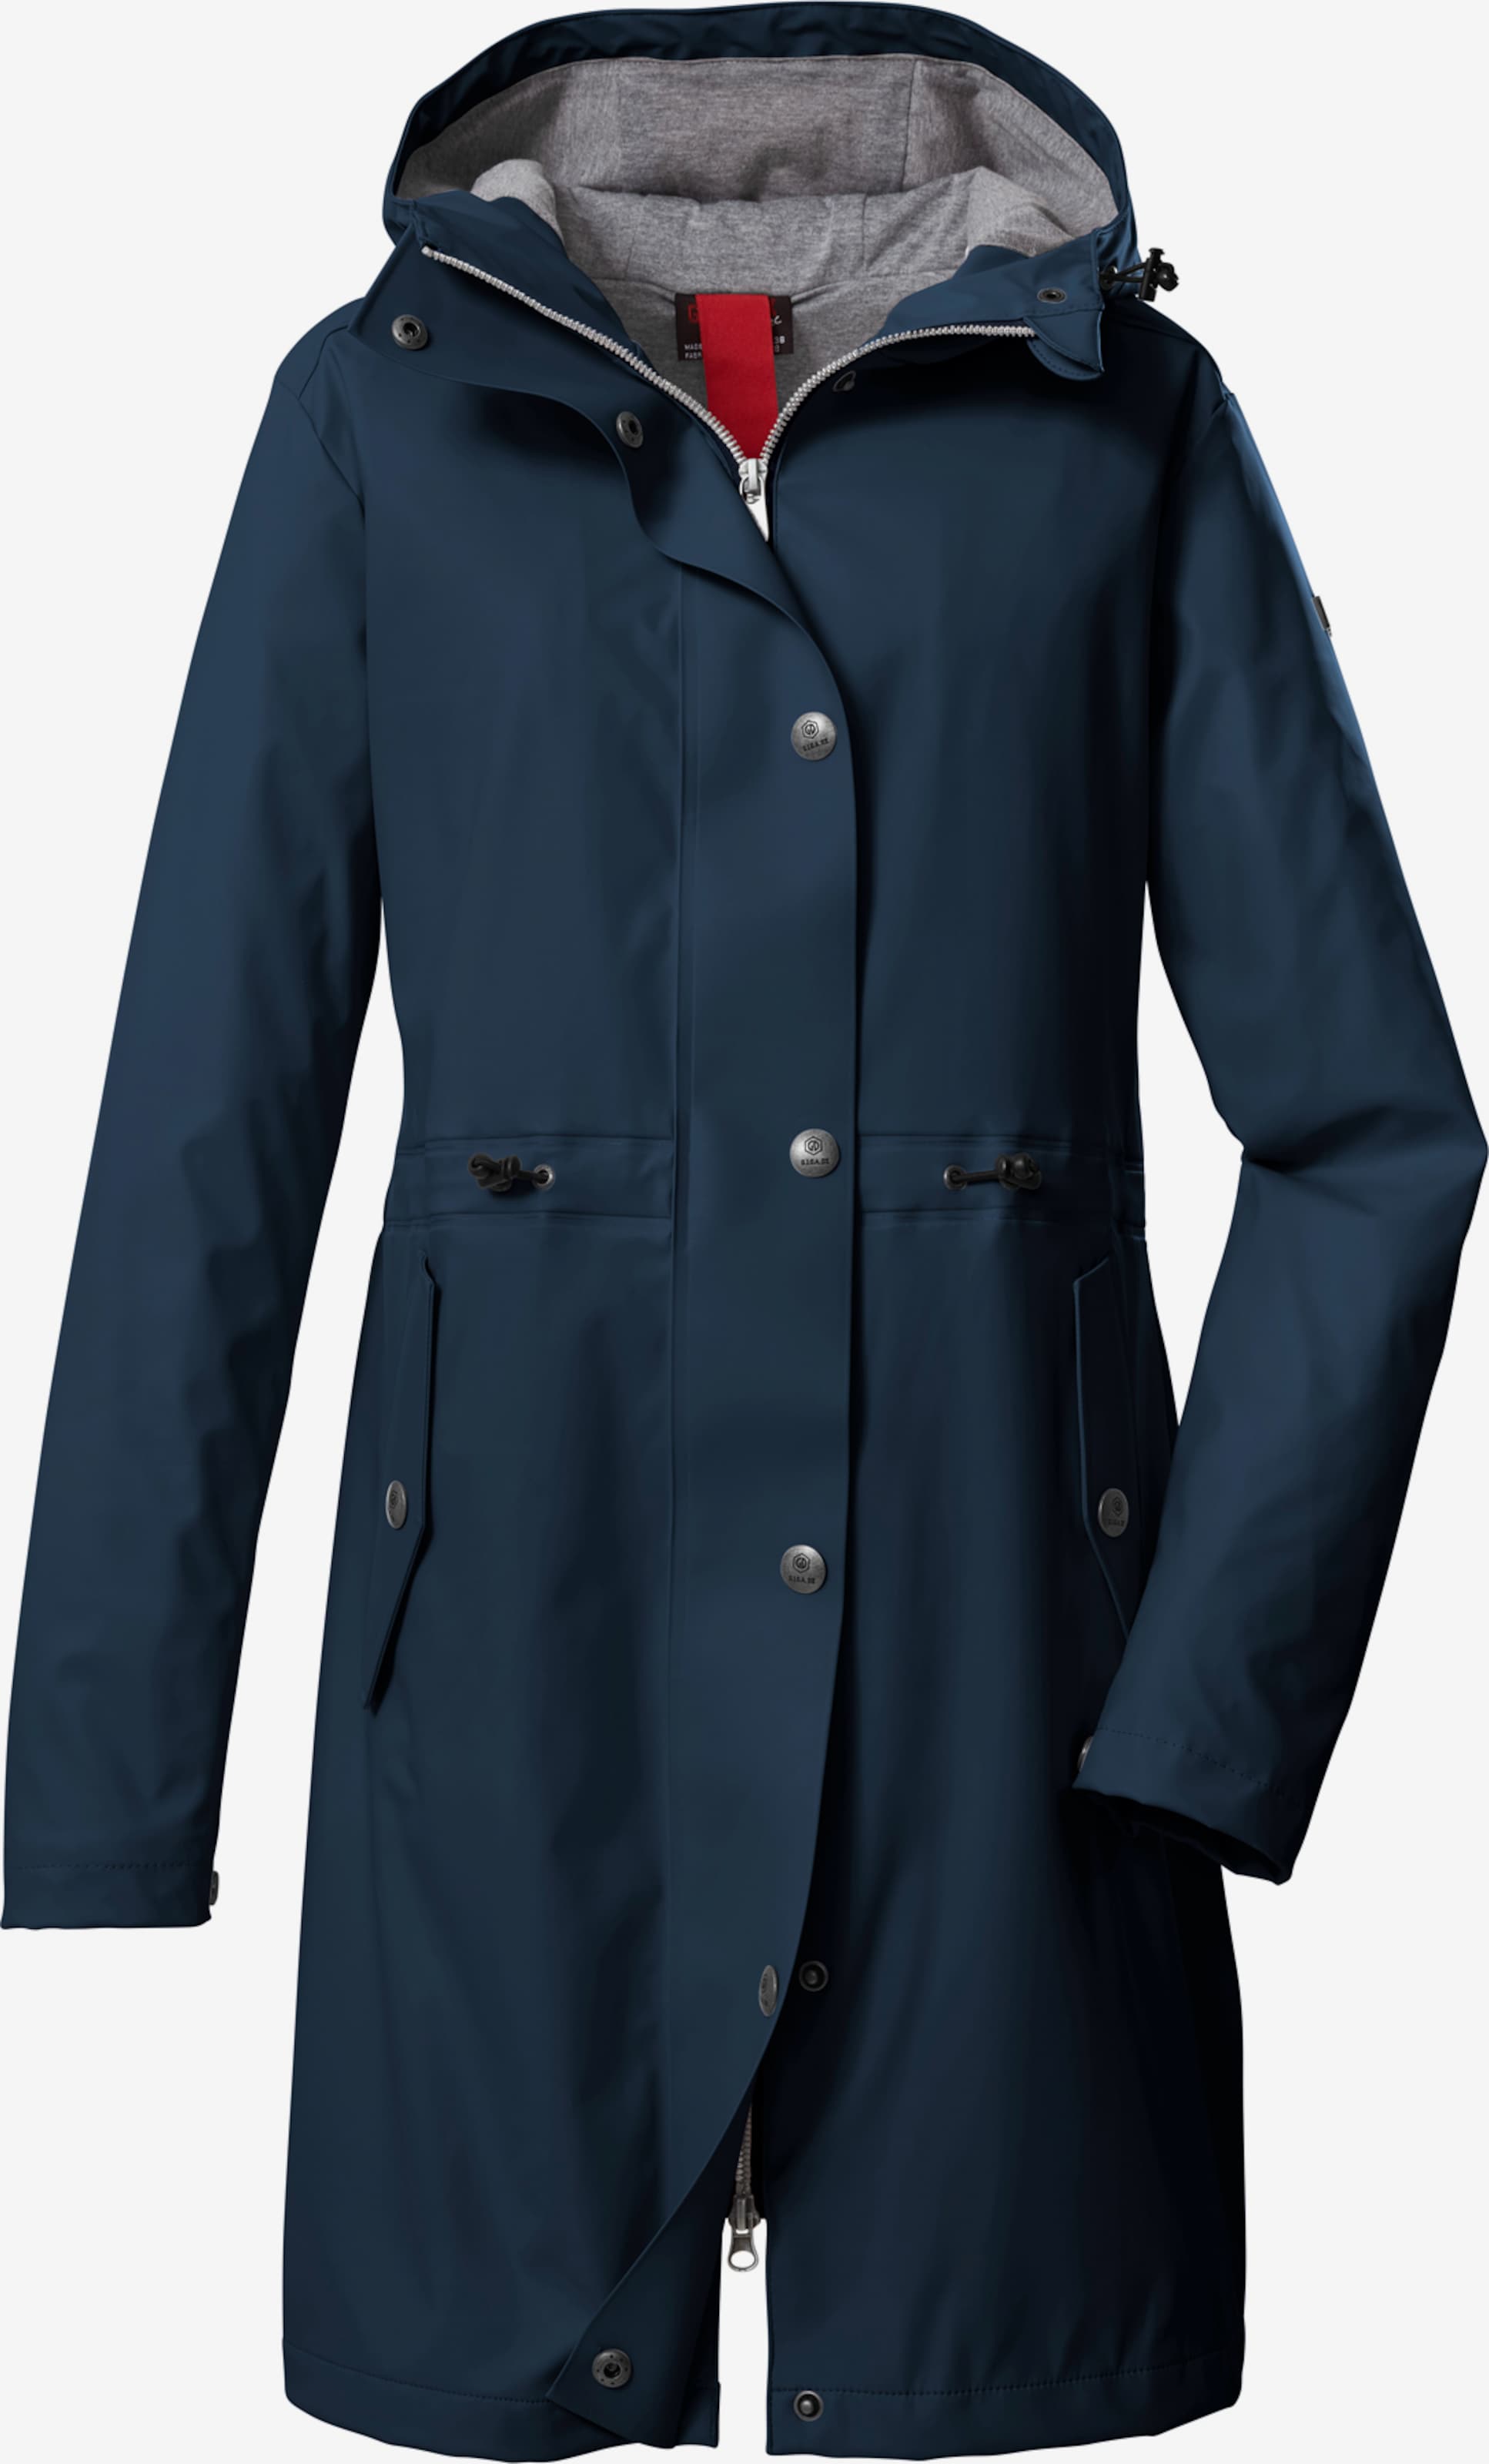 Raincoat Blue by \'GS Dark in killtec YOU ABOUT G.I.G.A. 101\' DX |